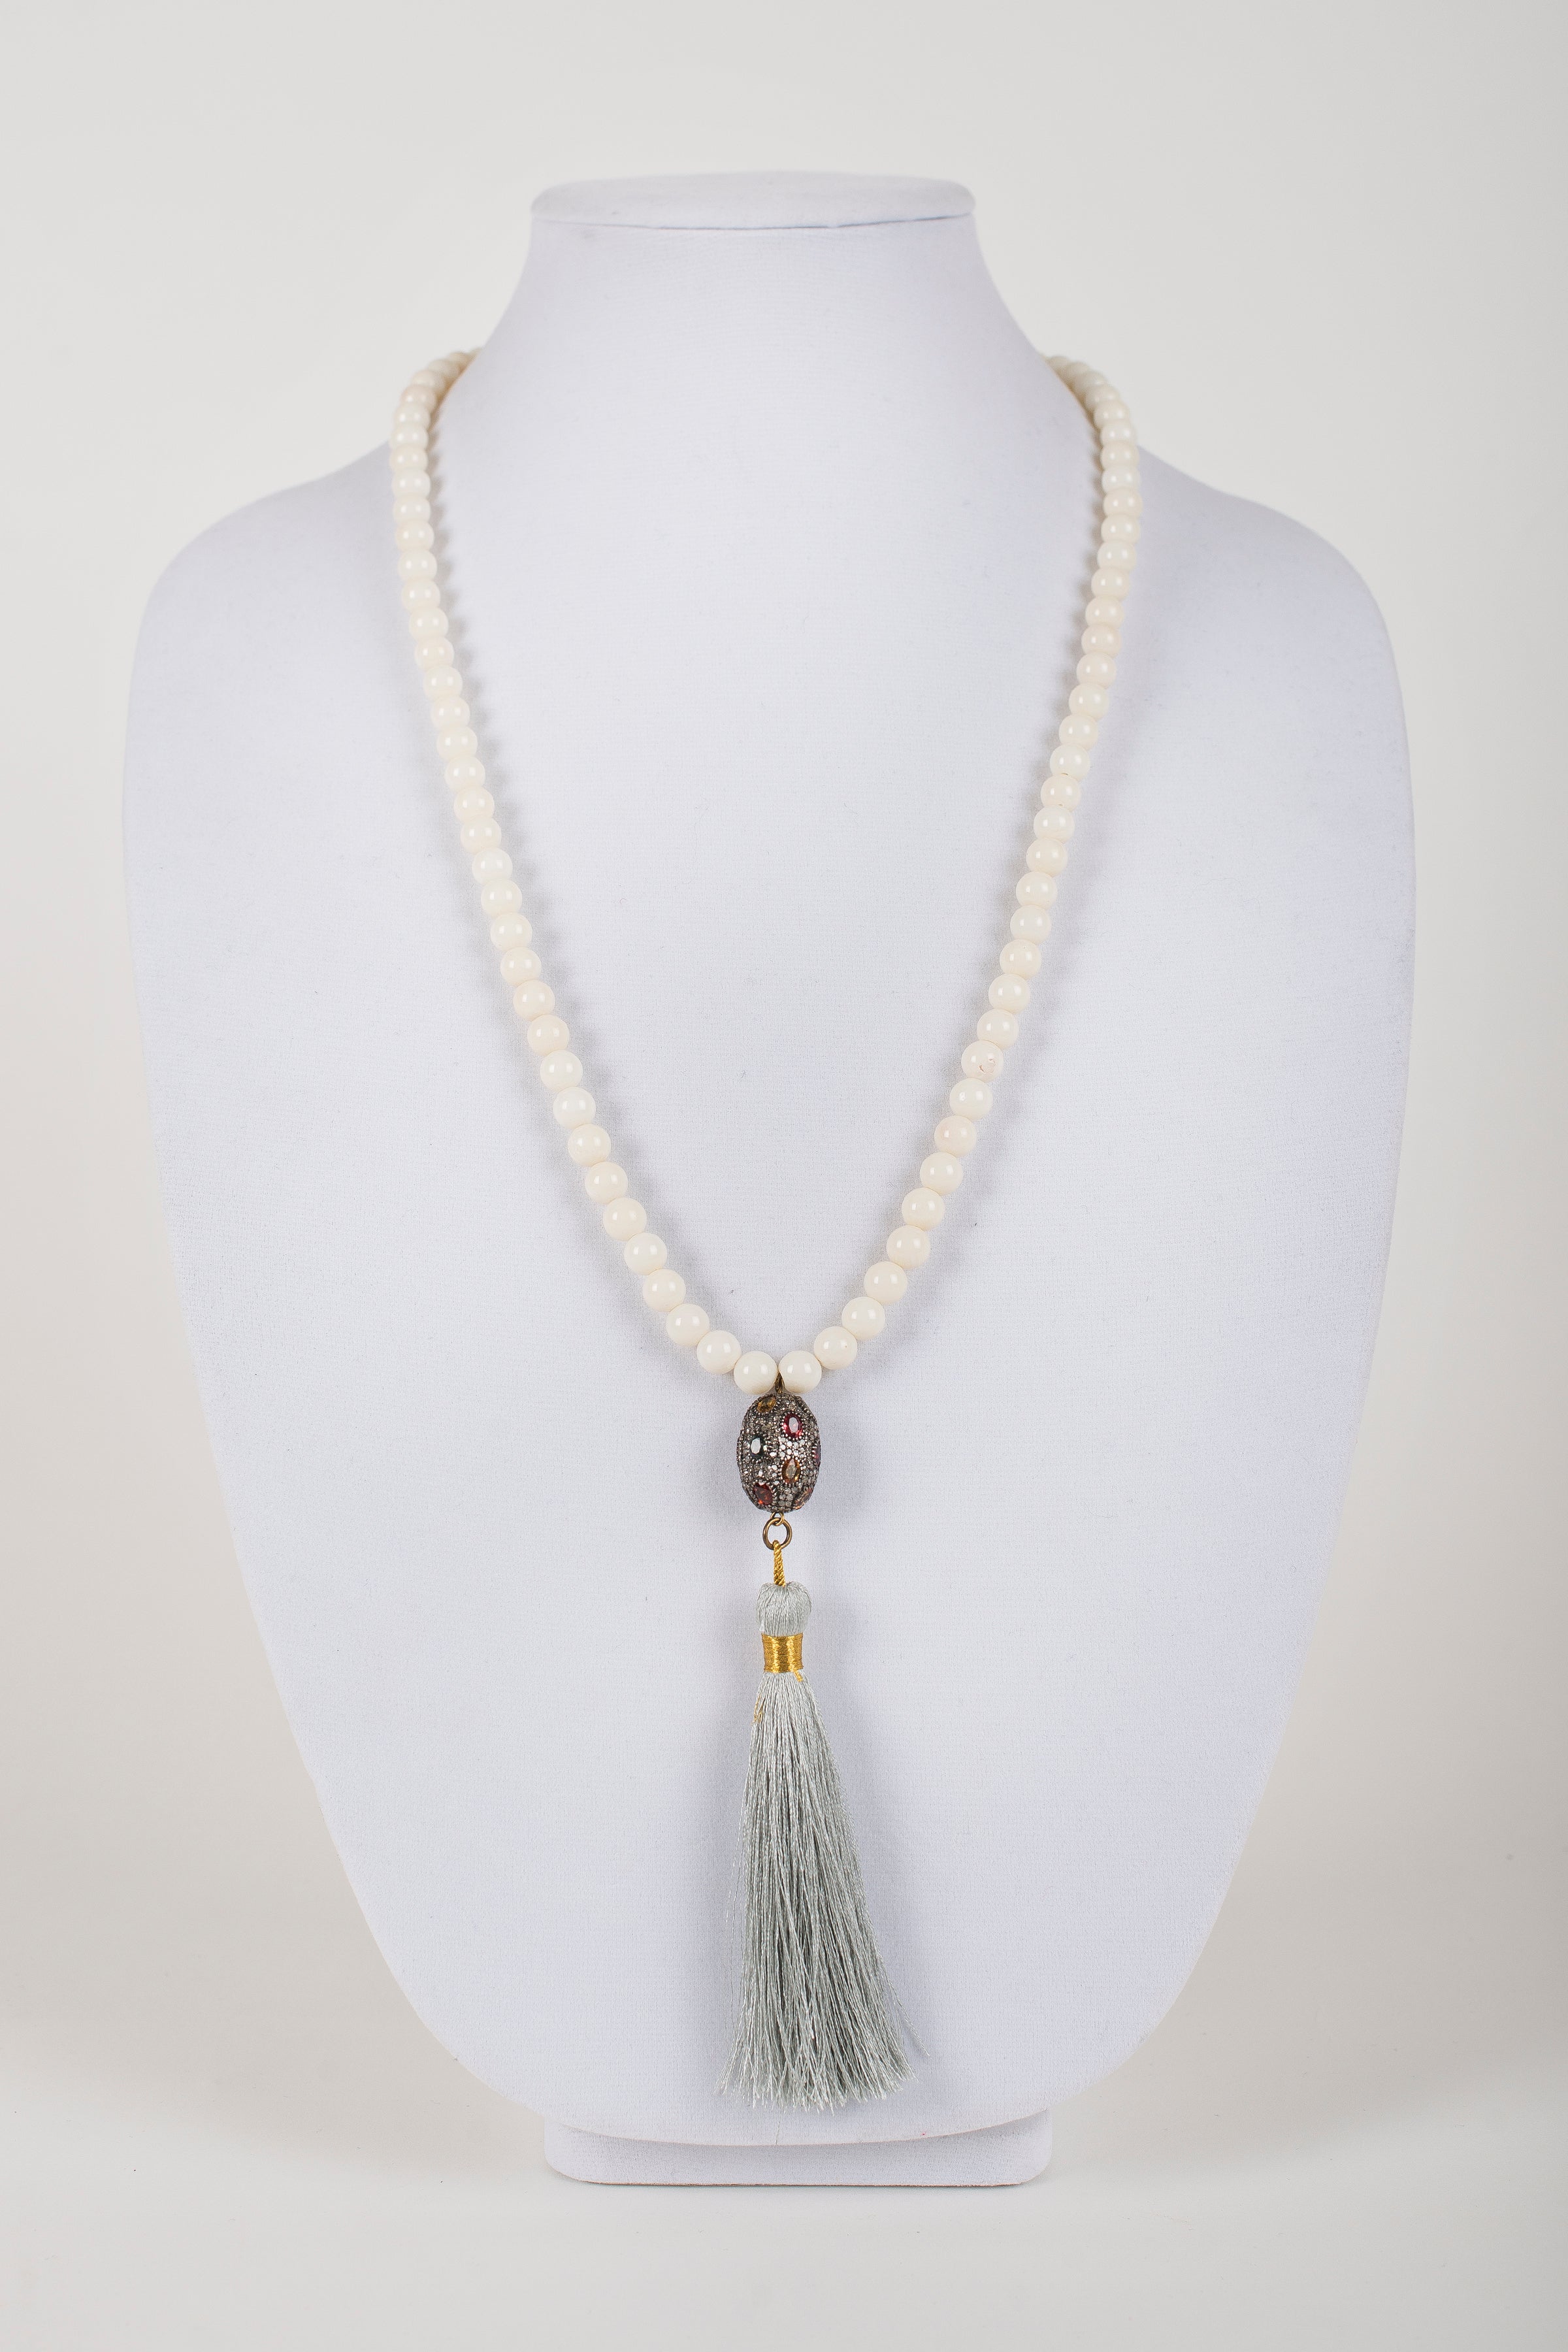 Coral Beads with Pave Diamond and Sapphire Bead with Silk Tassel